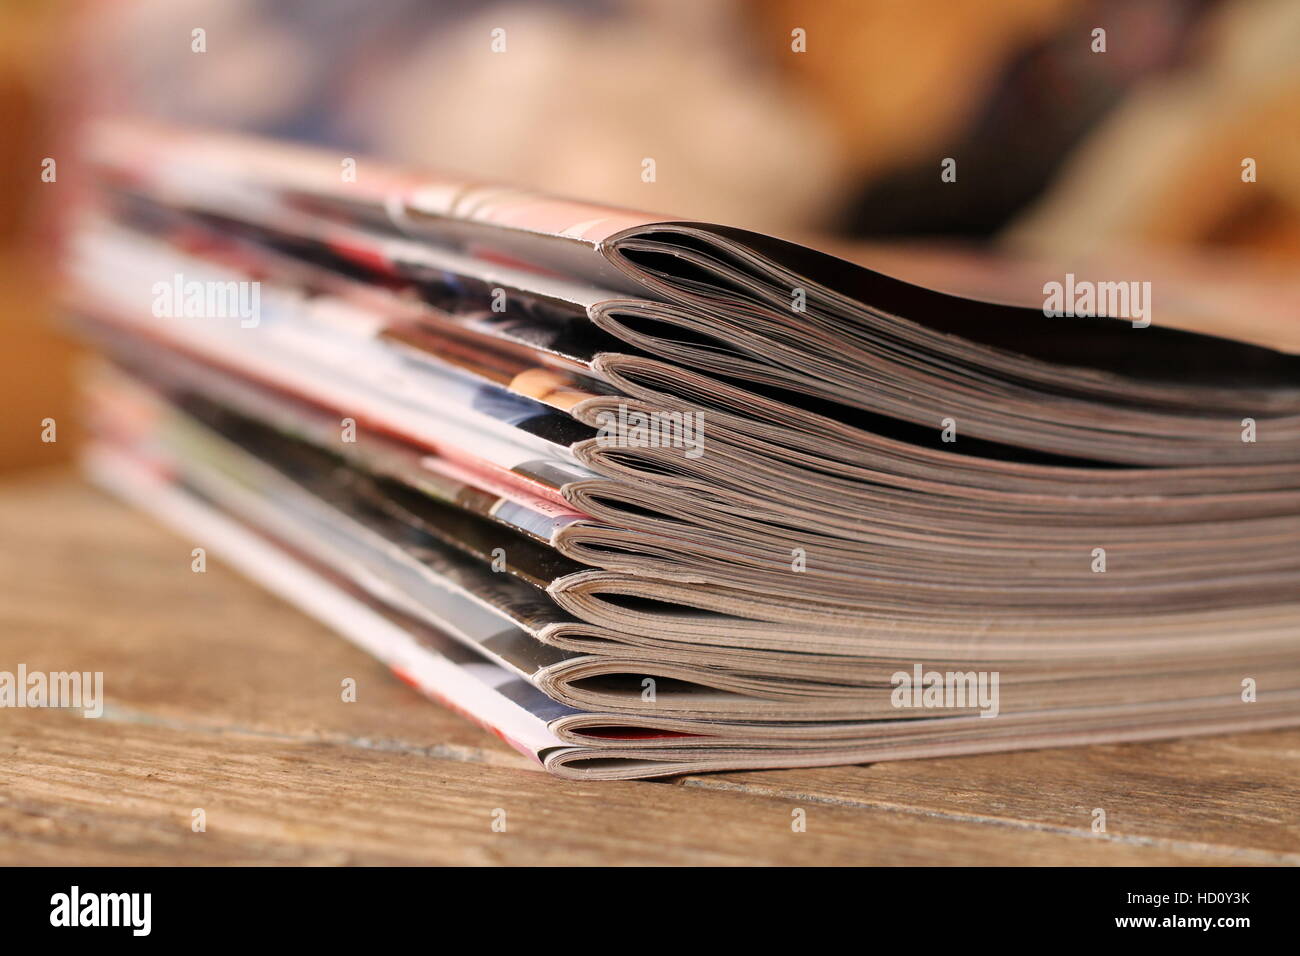 Magazines on the wooden table Stock Photo